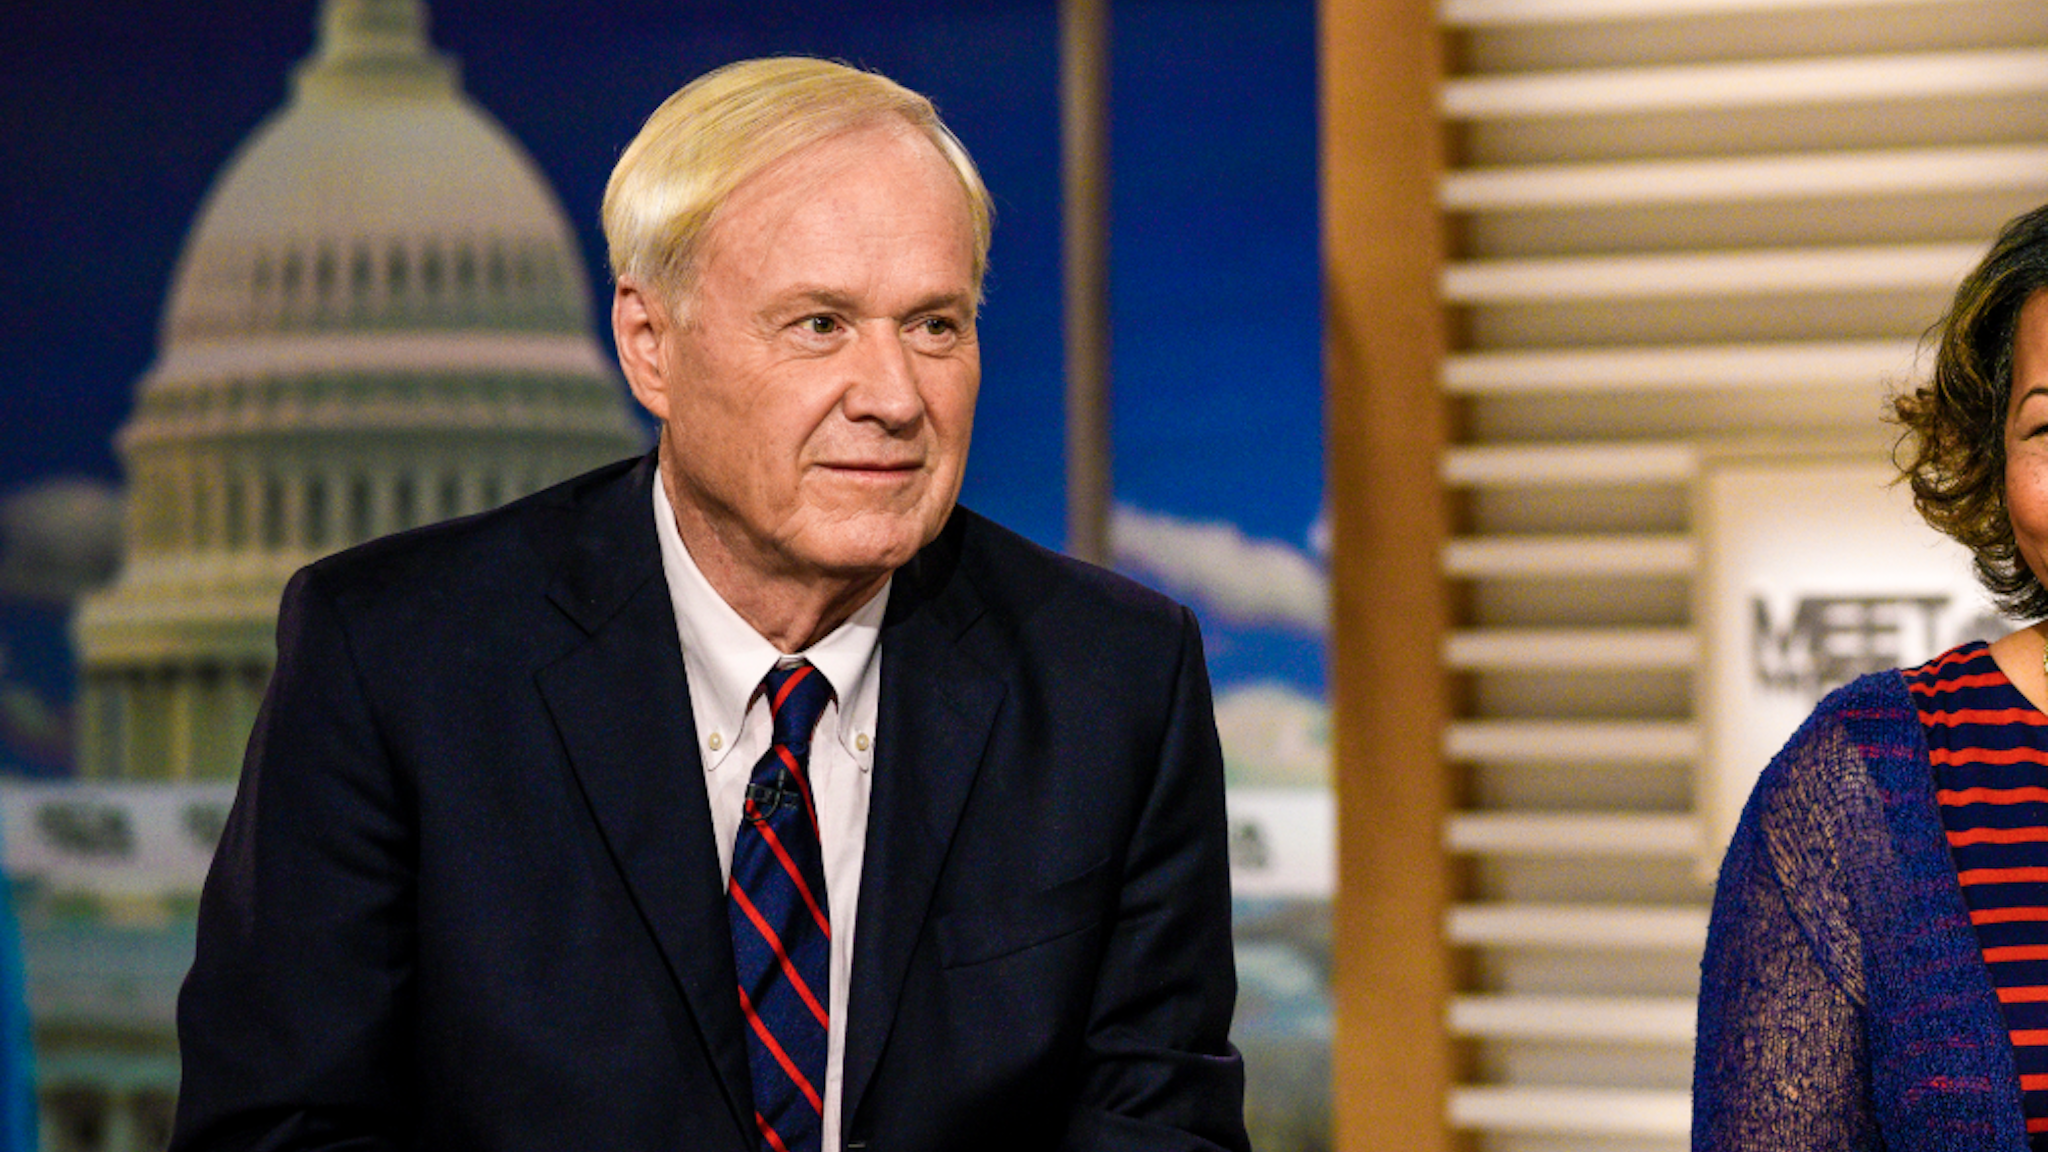 MEET THE PRESS -- Pictured: (l-r) ? Chris Matthews, Host, MSNBC?s ?Hardball? and Helene Cooper, Pentagon Correspondent, The New York Times appear on "Meet the Press" in Washington, D.C., Sunday, April 30, 2017.